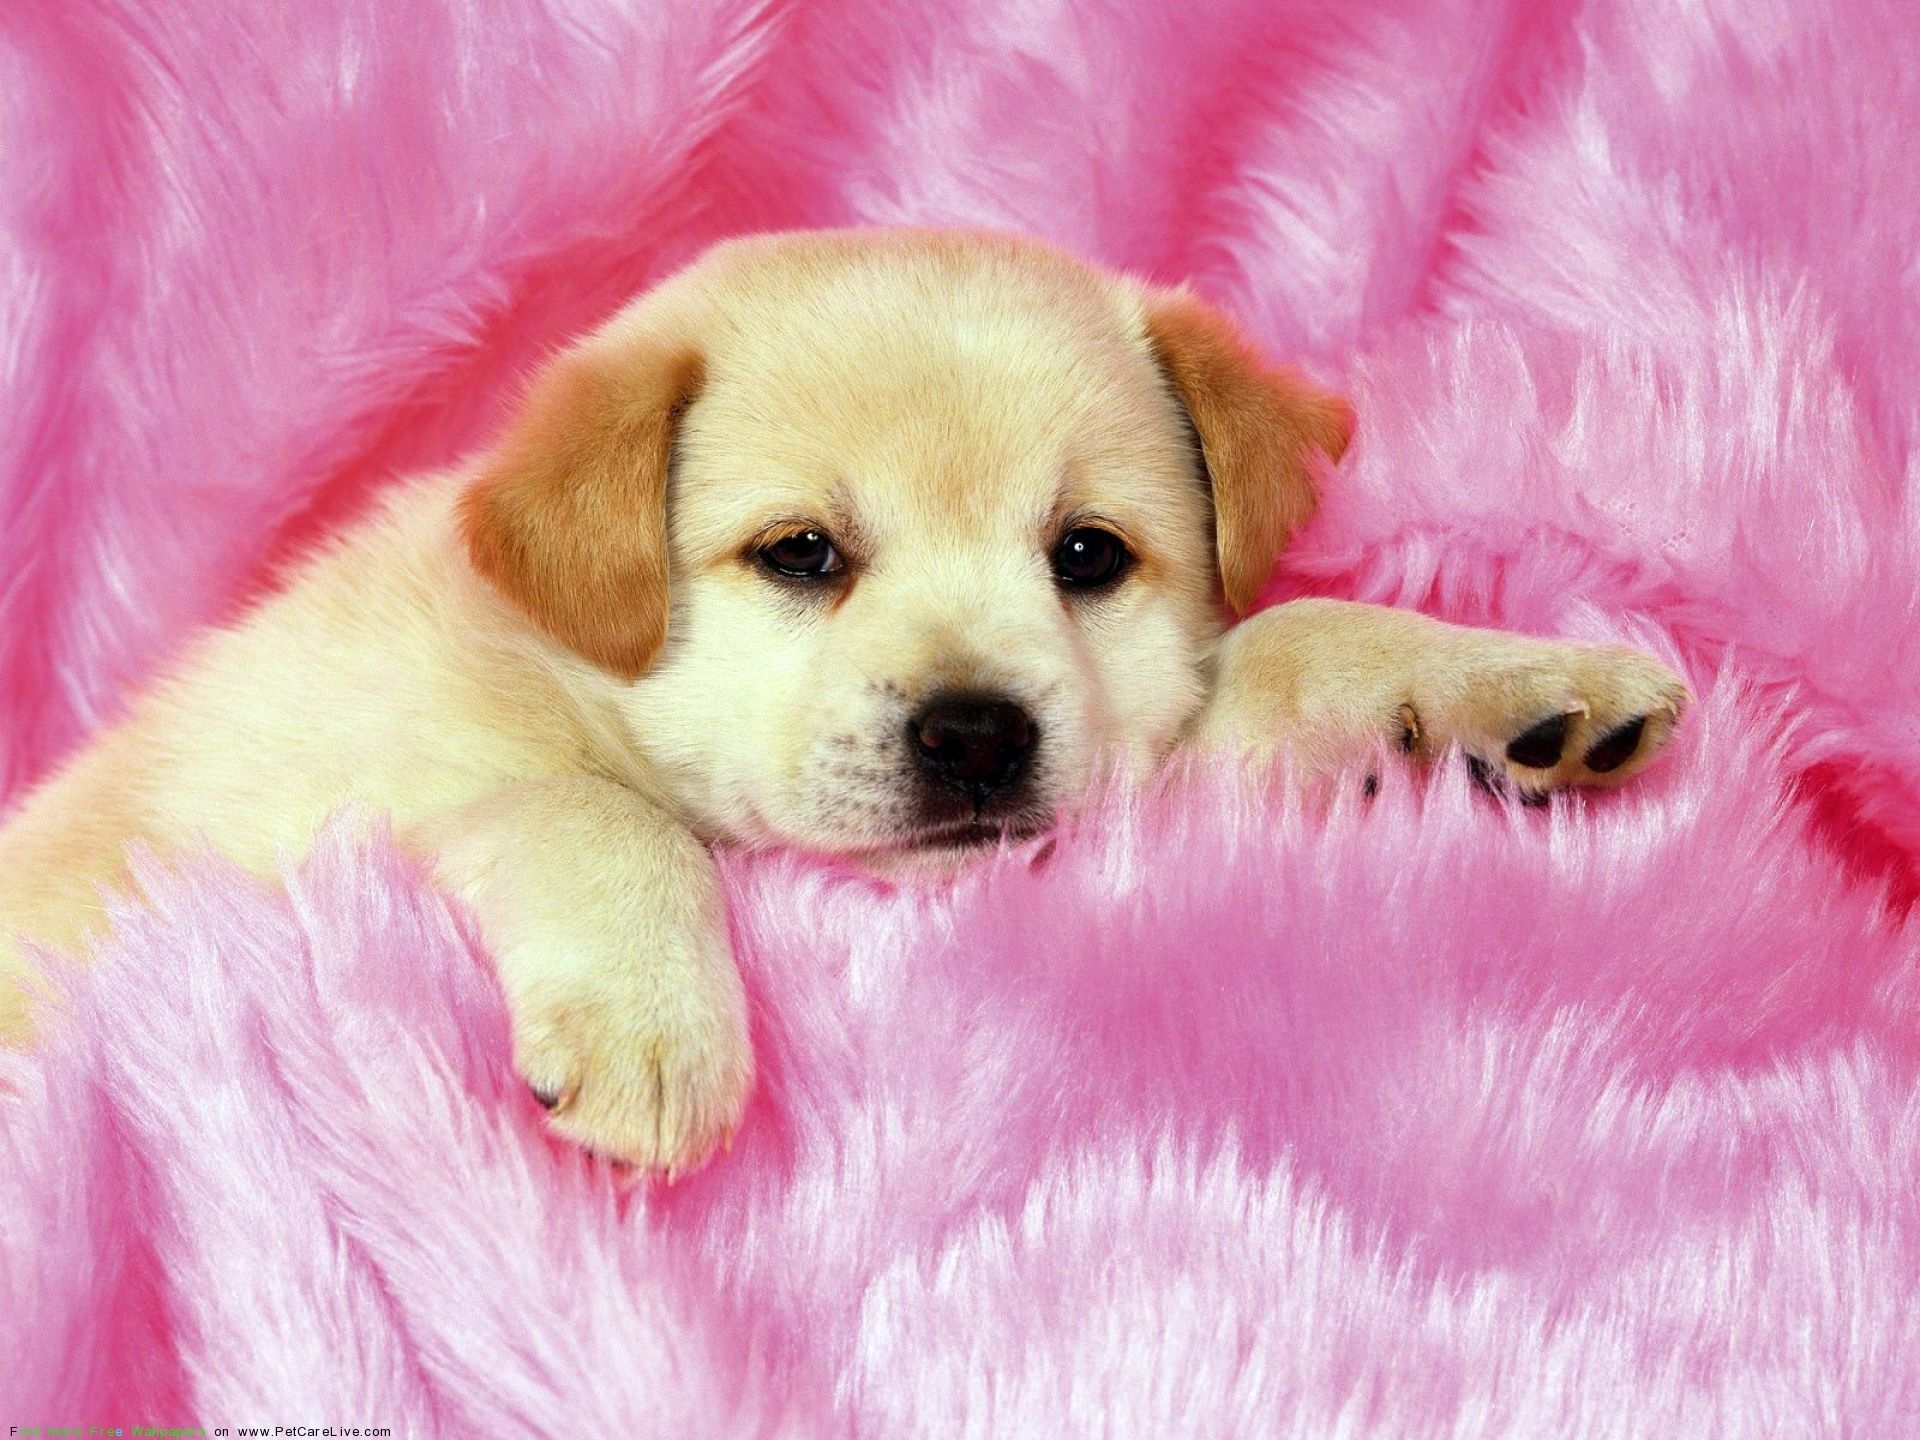 10 Top Cute Wallpapers Of Puppies FULL HD 1920×1080 For PC Background